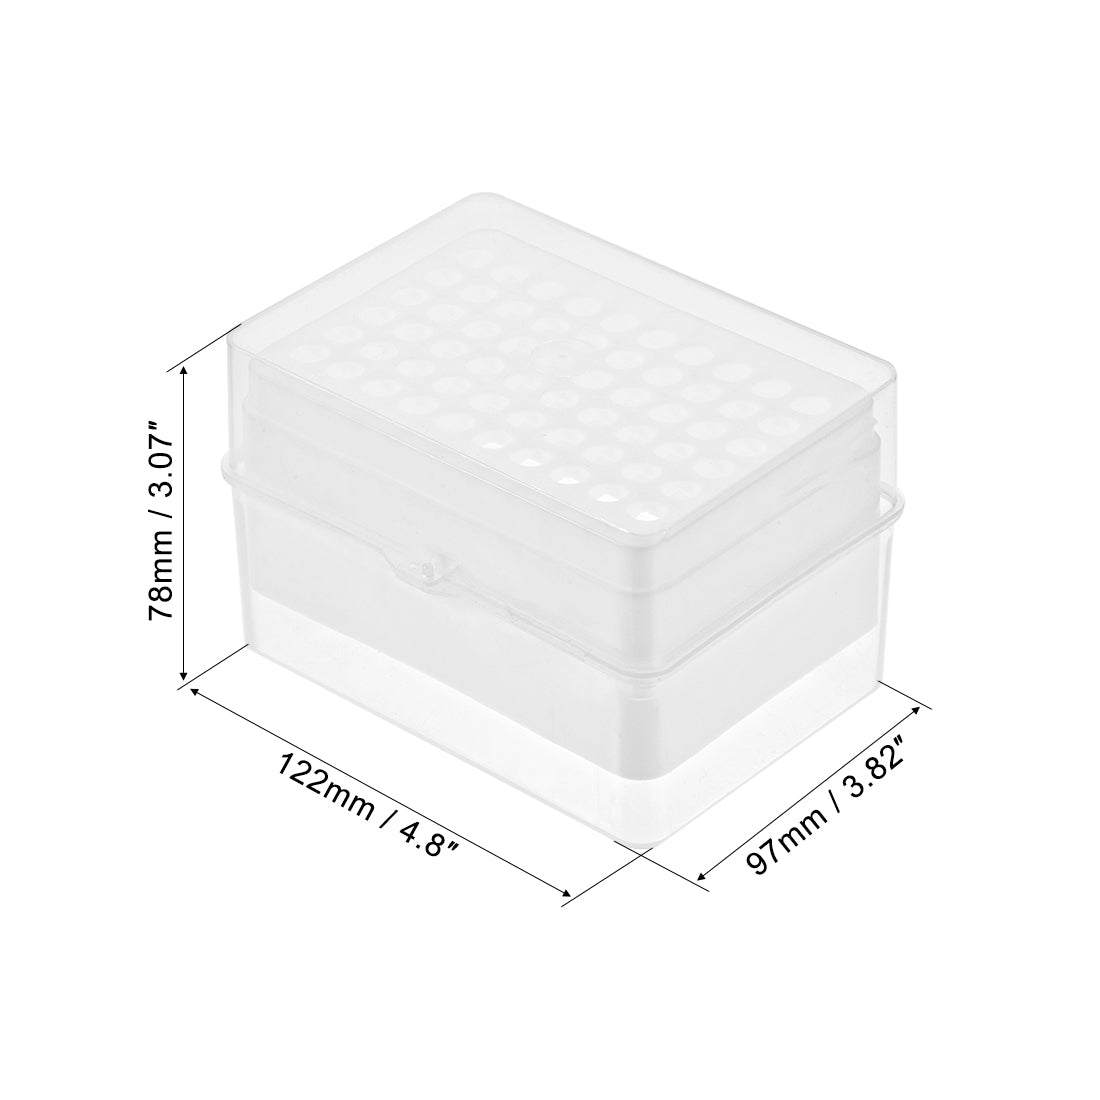 uxcell Uxcell Pipette Tips Box 60-Well Polypropylene Tip Holder Container for 1ml/1000µl Pipettor 8mm Hole Diameter